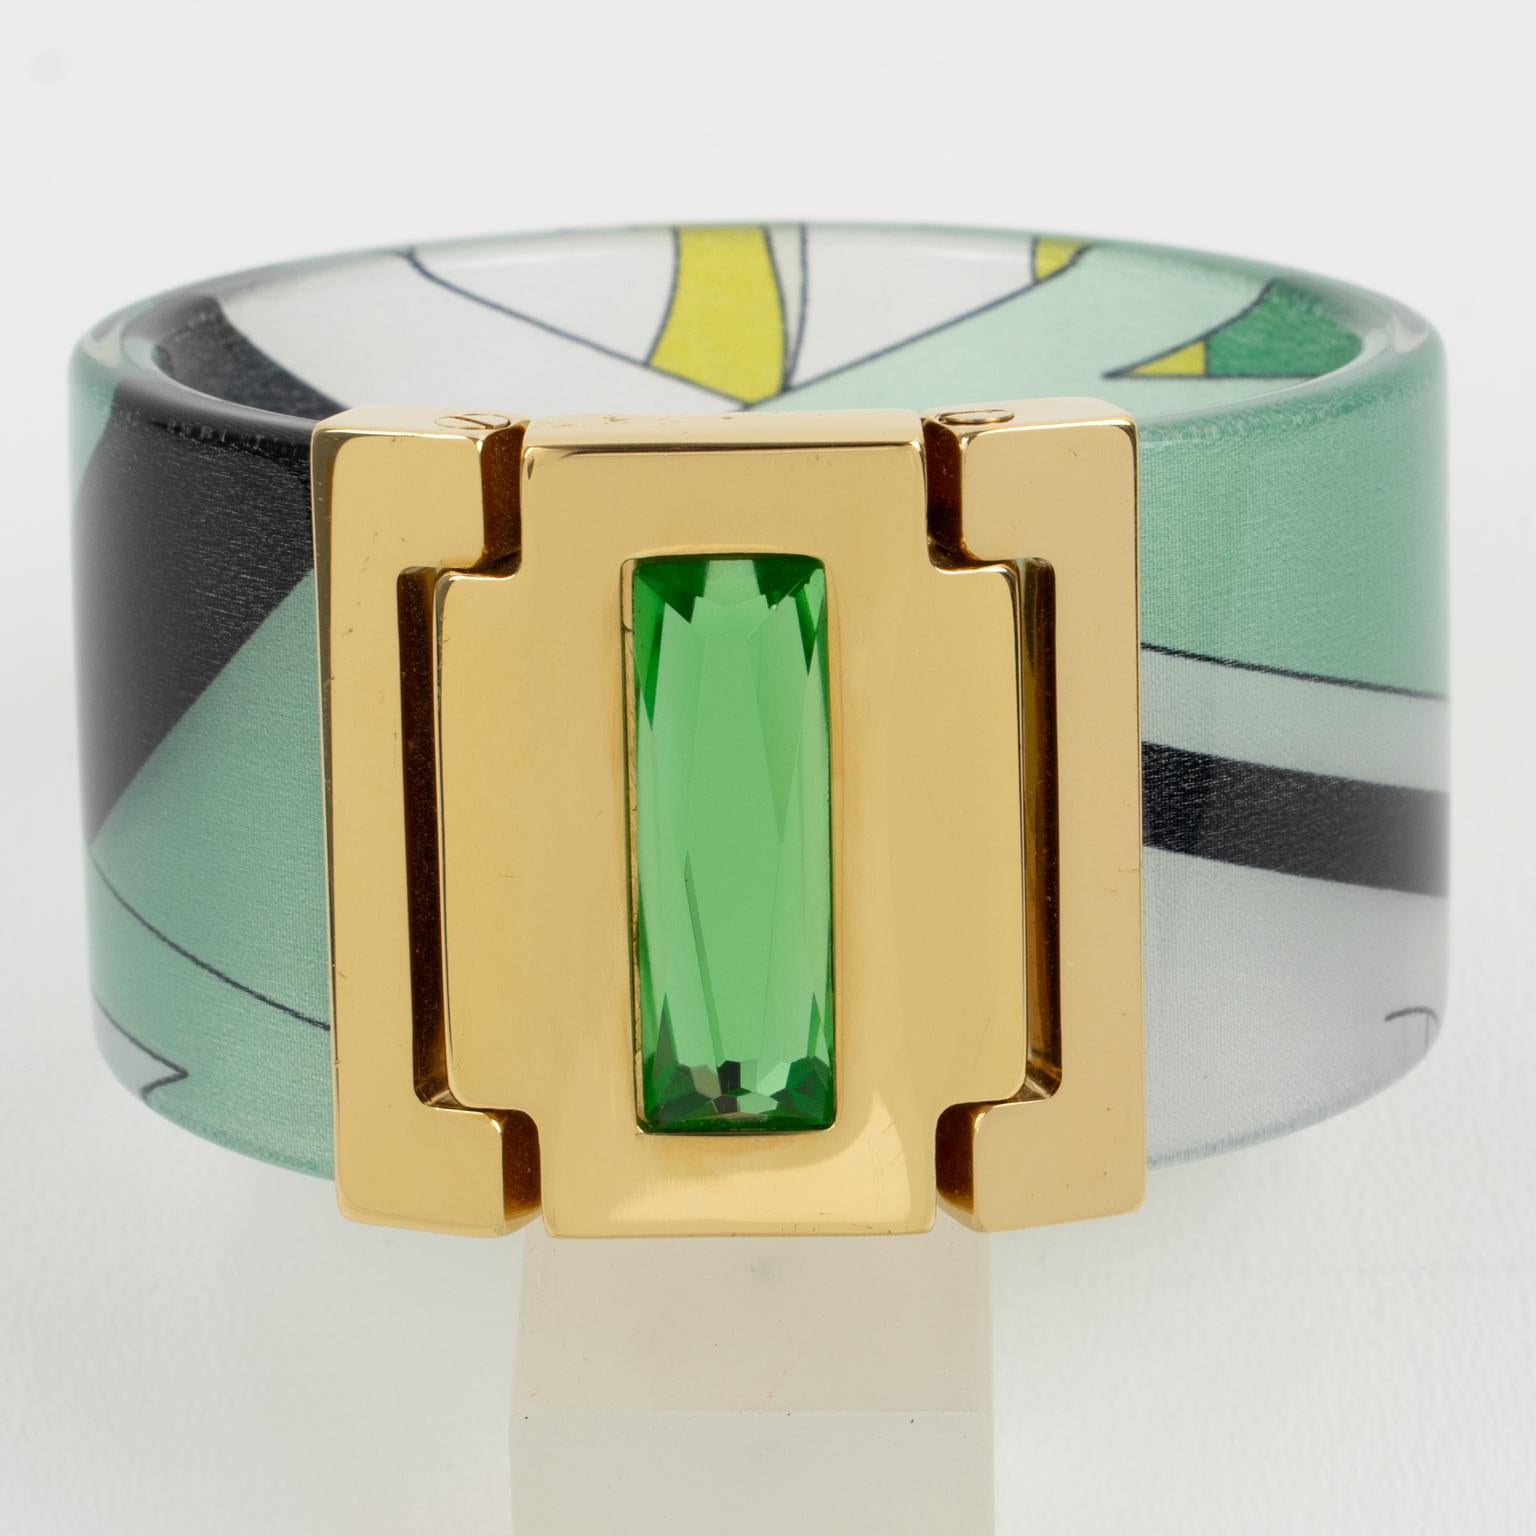 Emilio Pucci Jeweled Bracelet Bangle Lucite with Green and Black Silk Inclusion For Sale 1